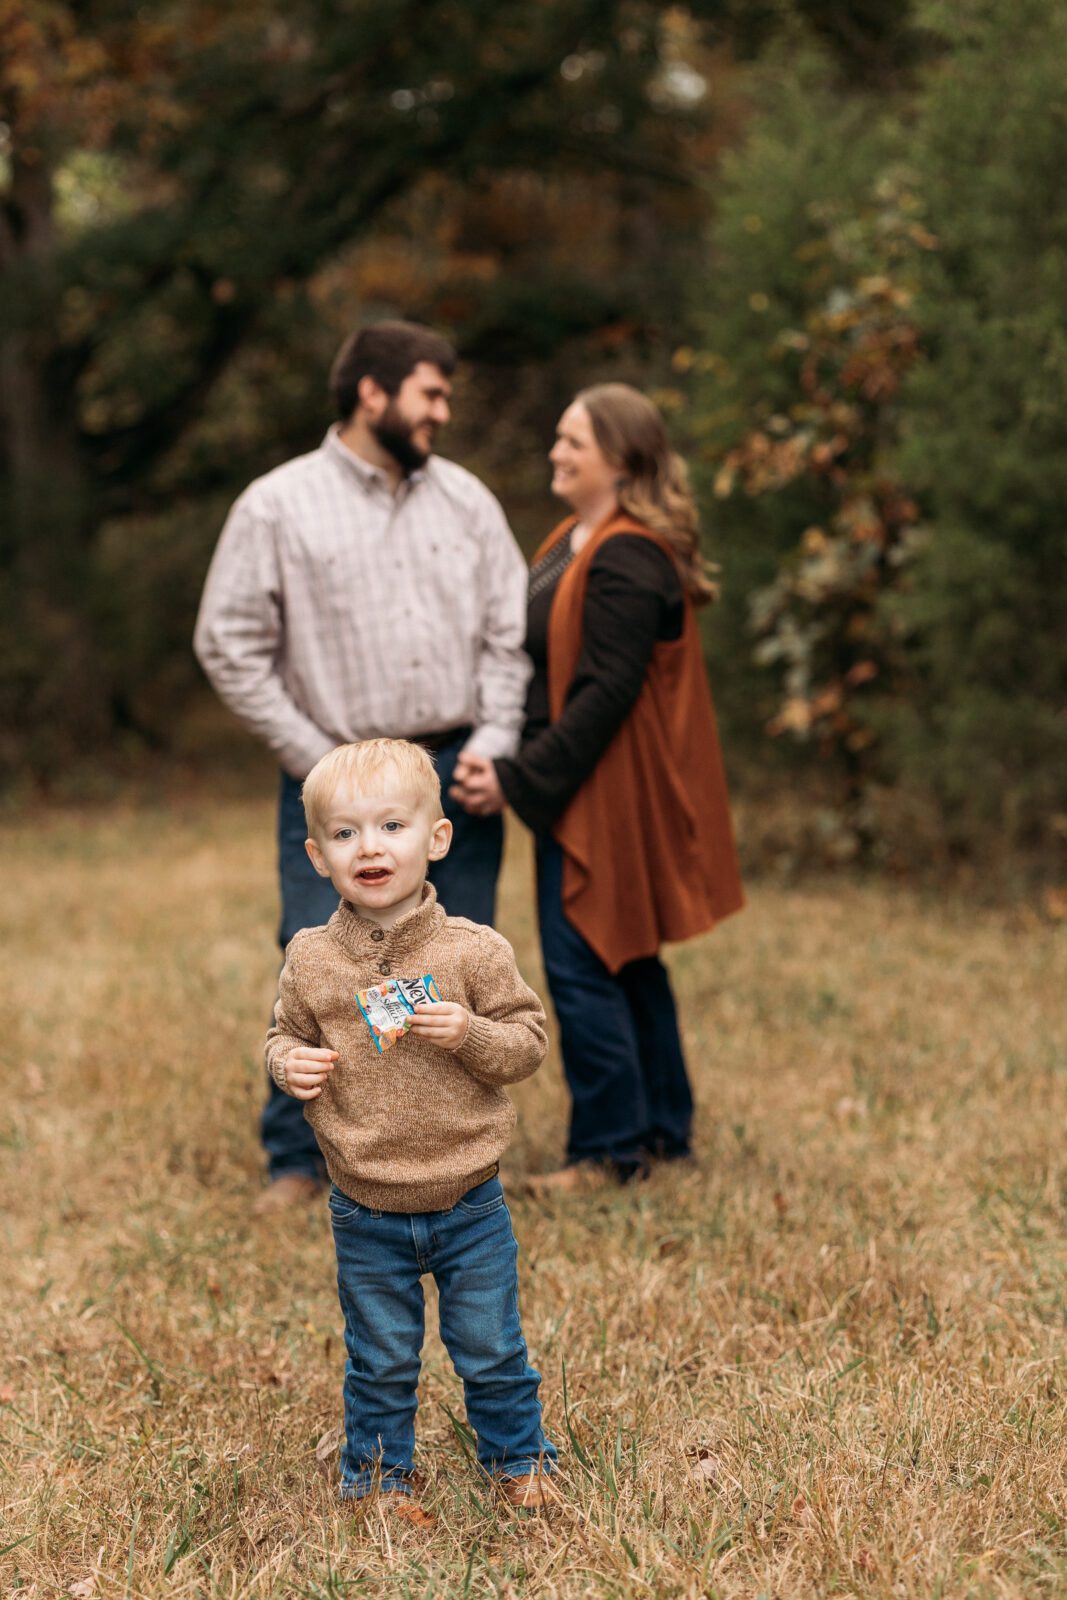 Tips for family photos with young children